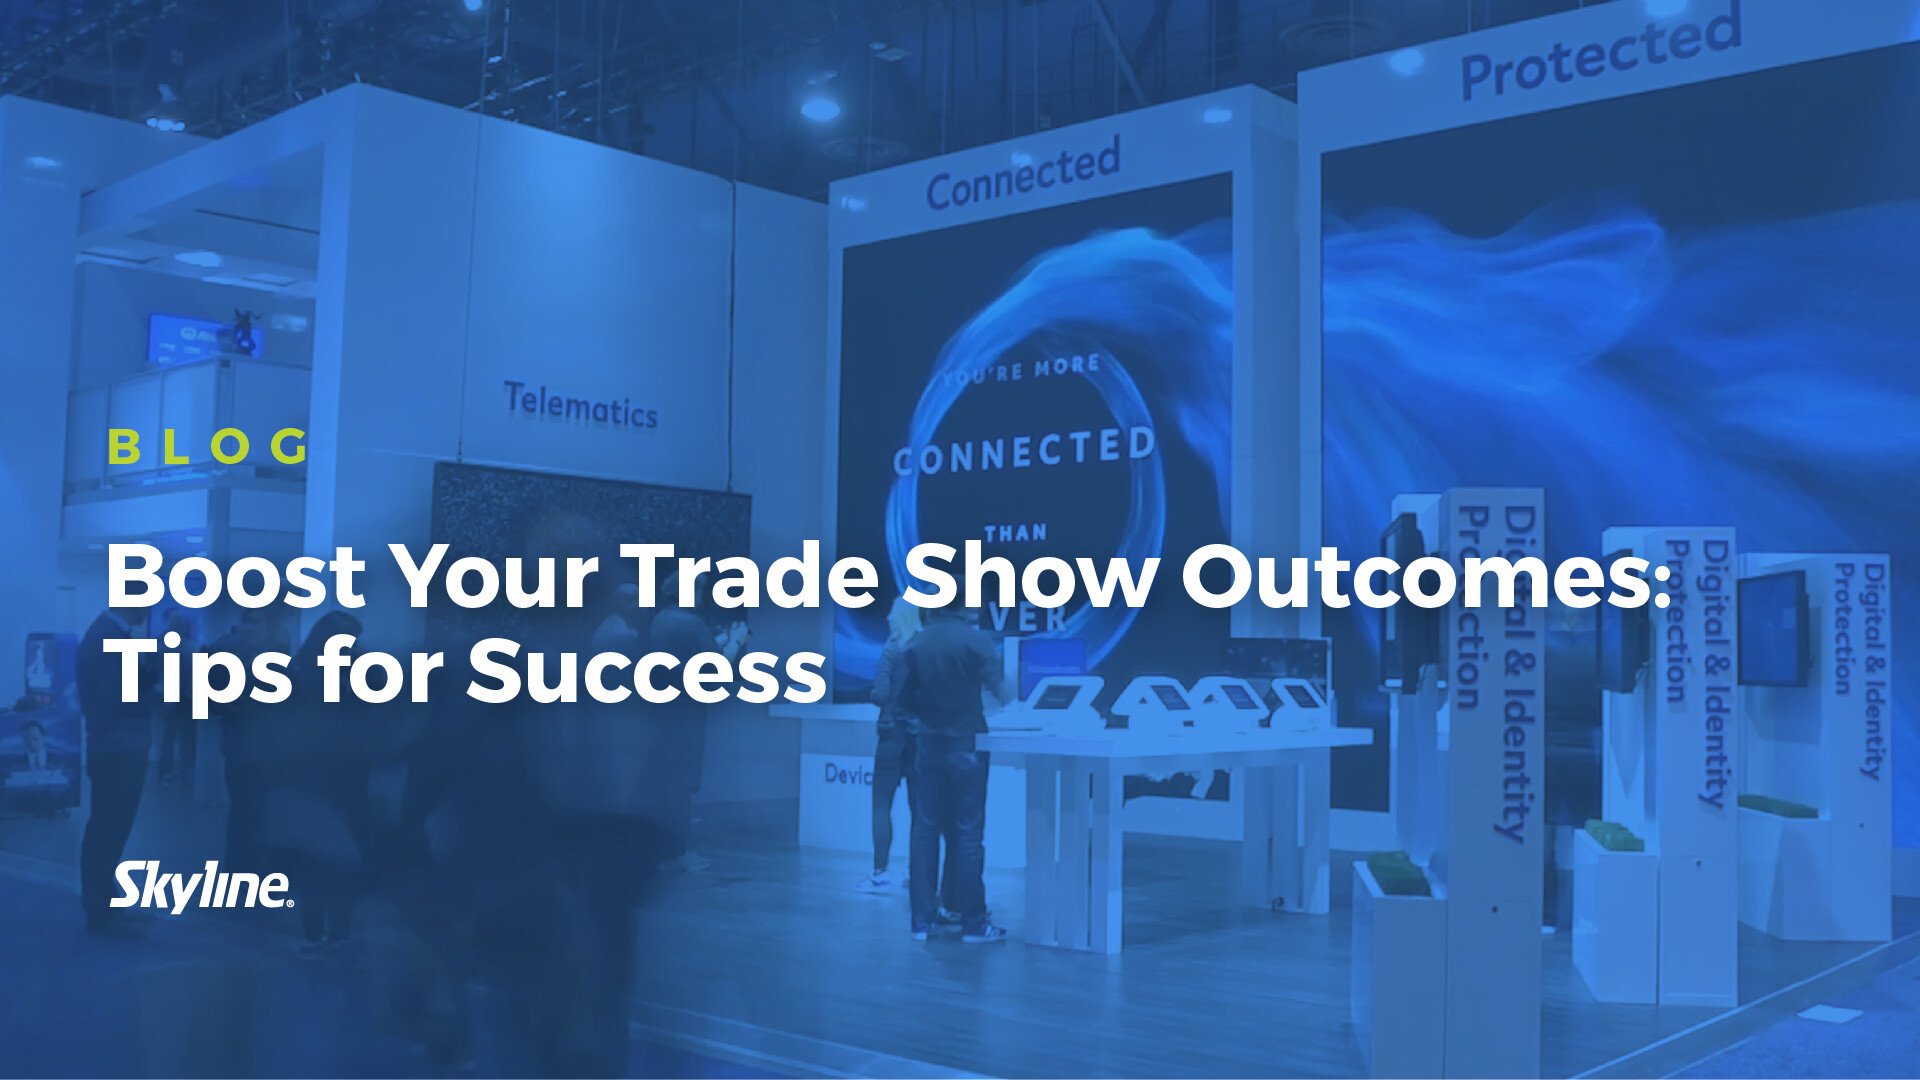  Boost Your Trade Show Outcomes: Tips for Success 